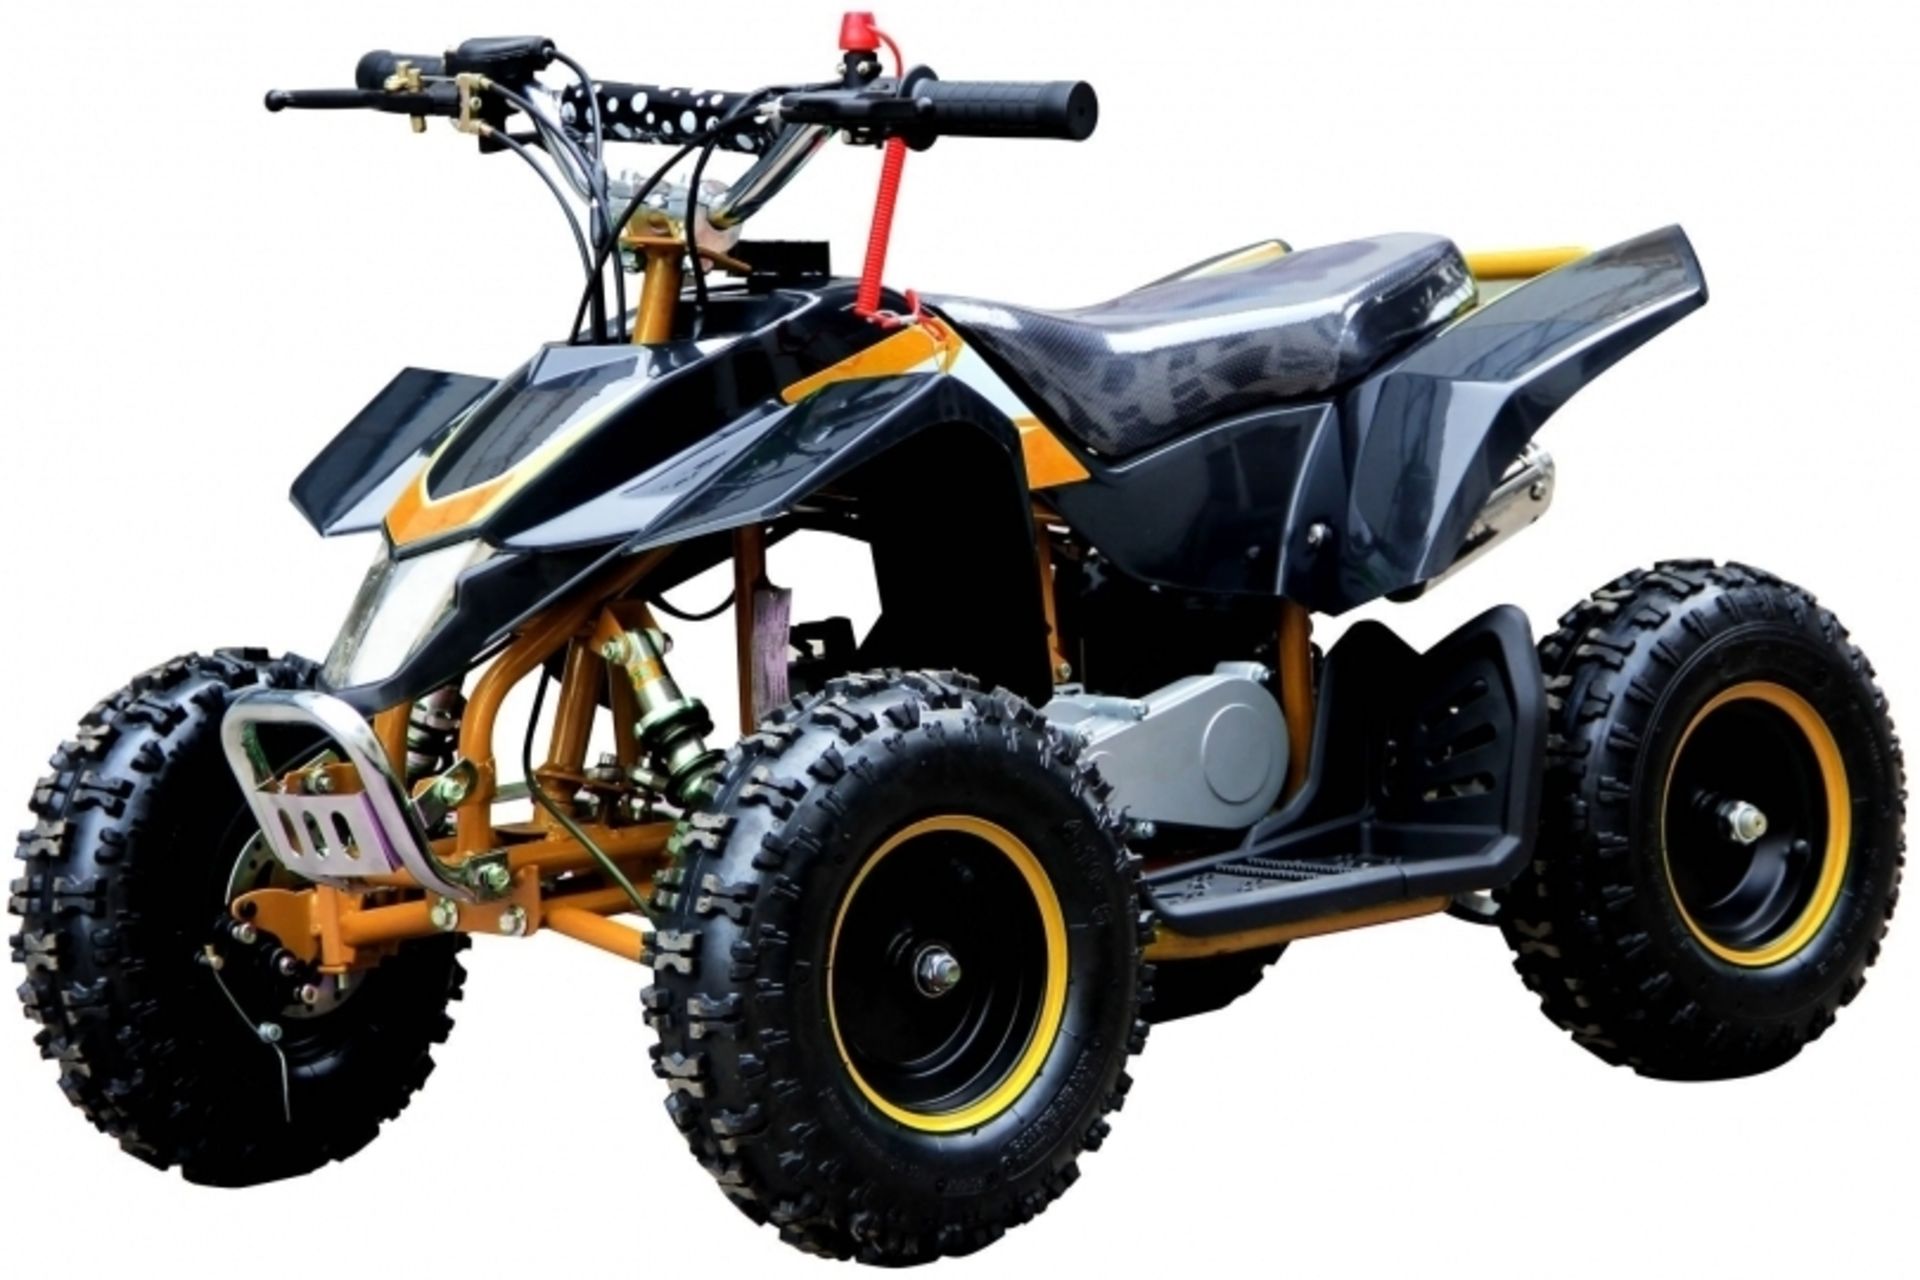 + VAT Brand New 50cc Zikai Mini Quad - Colours May Vary - Available Approx 5 Working Days After